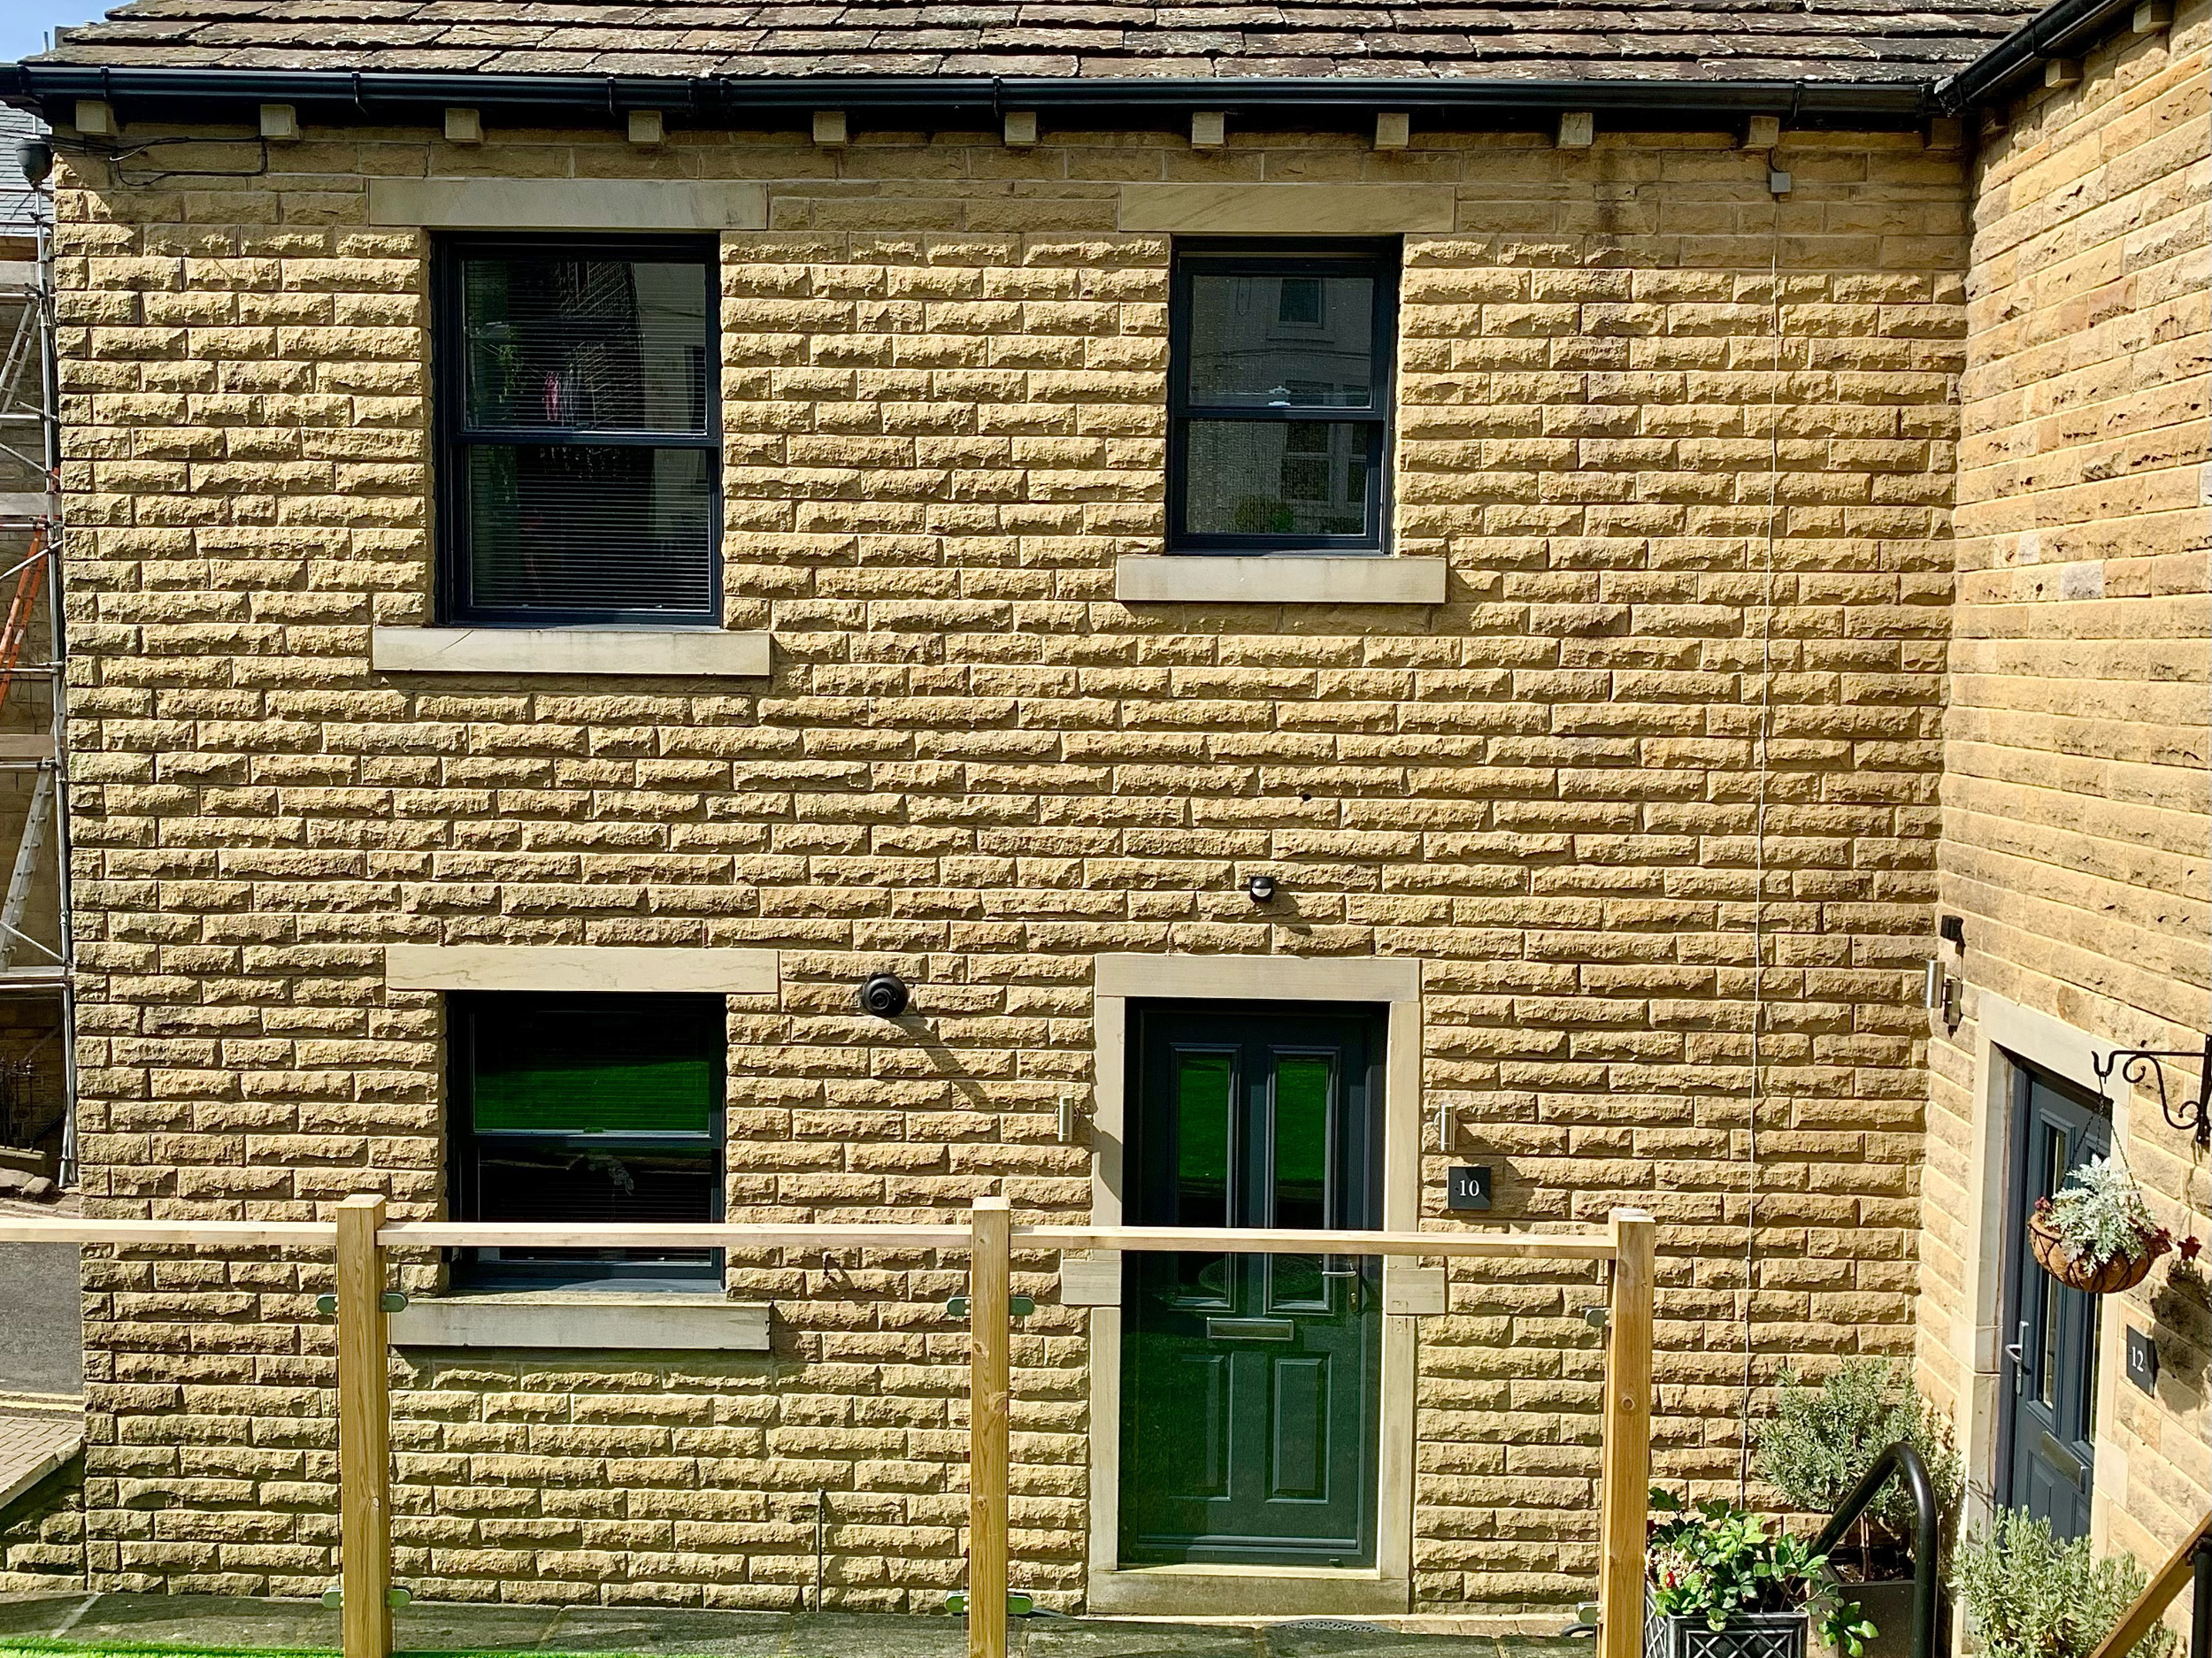 3 bedroom Cottage for rent in Holmfirth